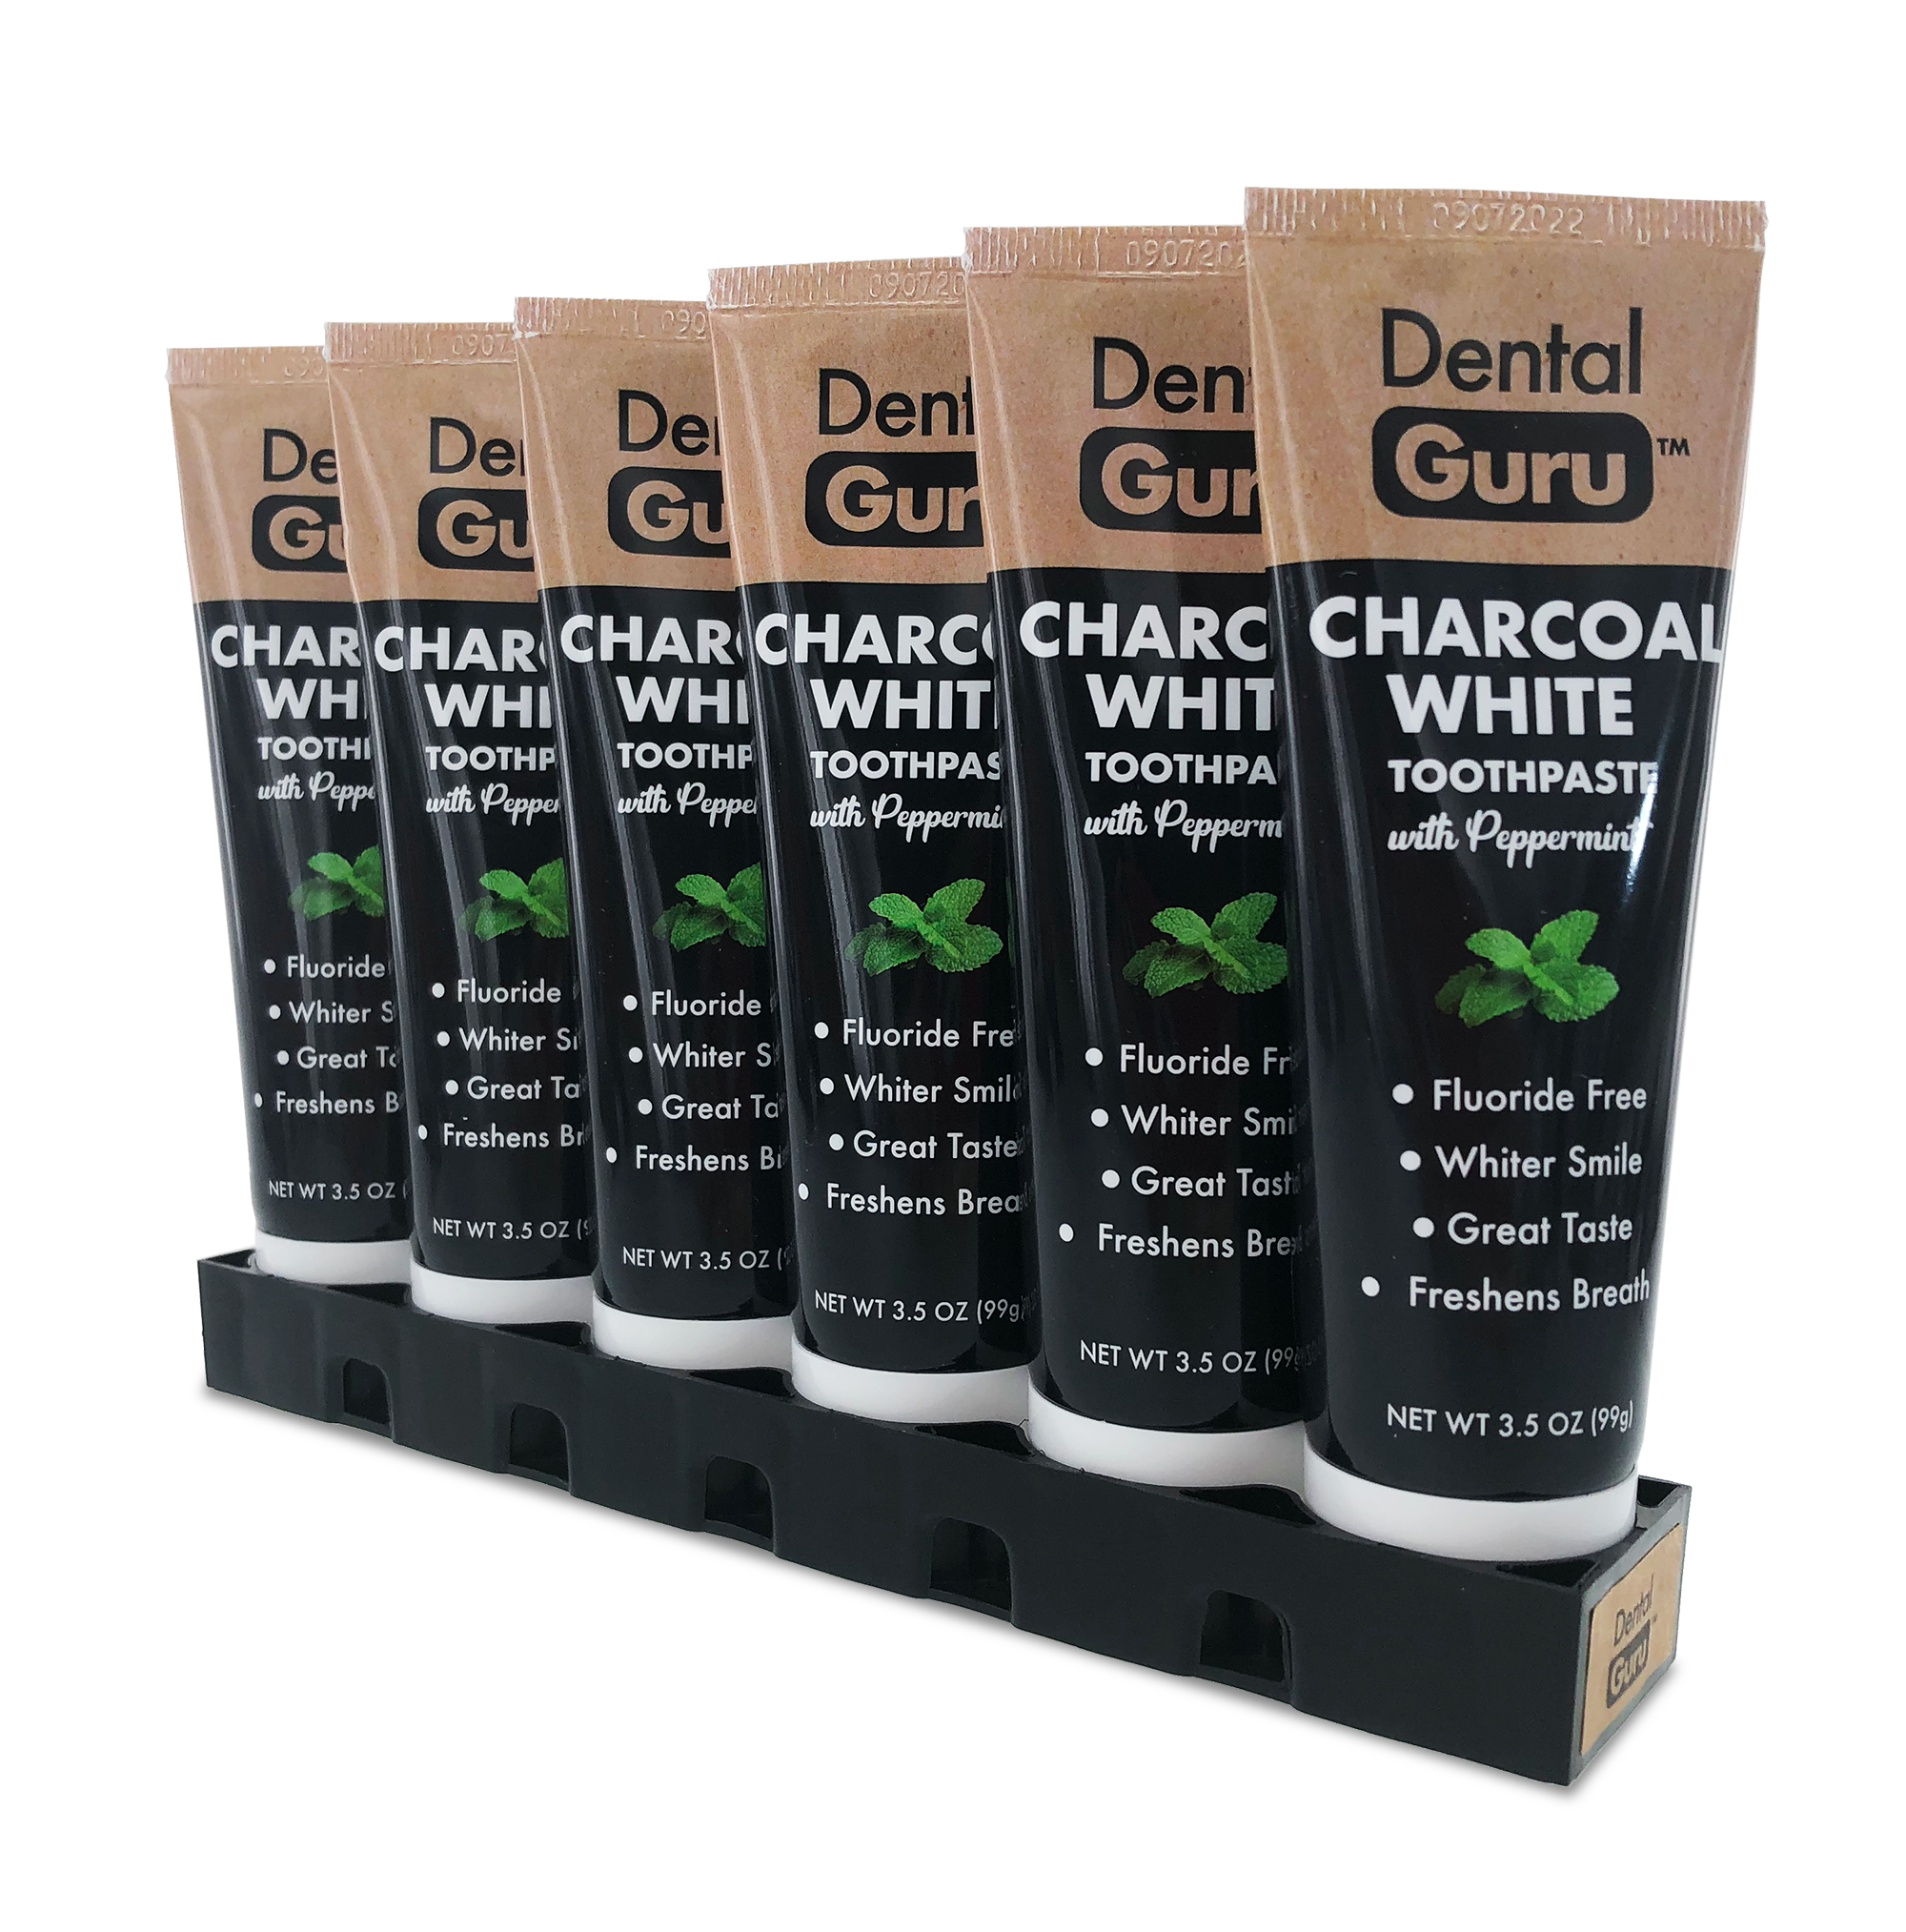 Dental Guru Charcoal Toothpaste (Pack of 18)- Wholesale Only, Contact to Purchase